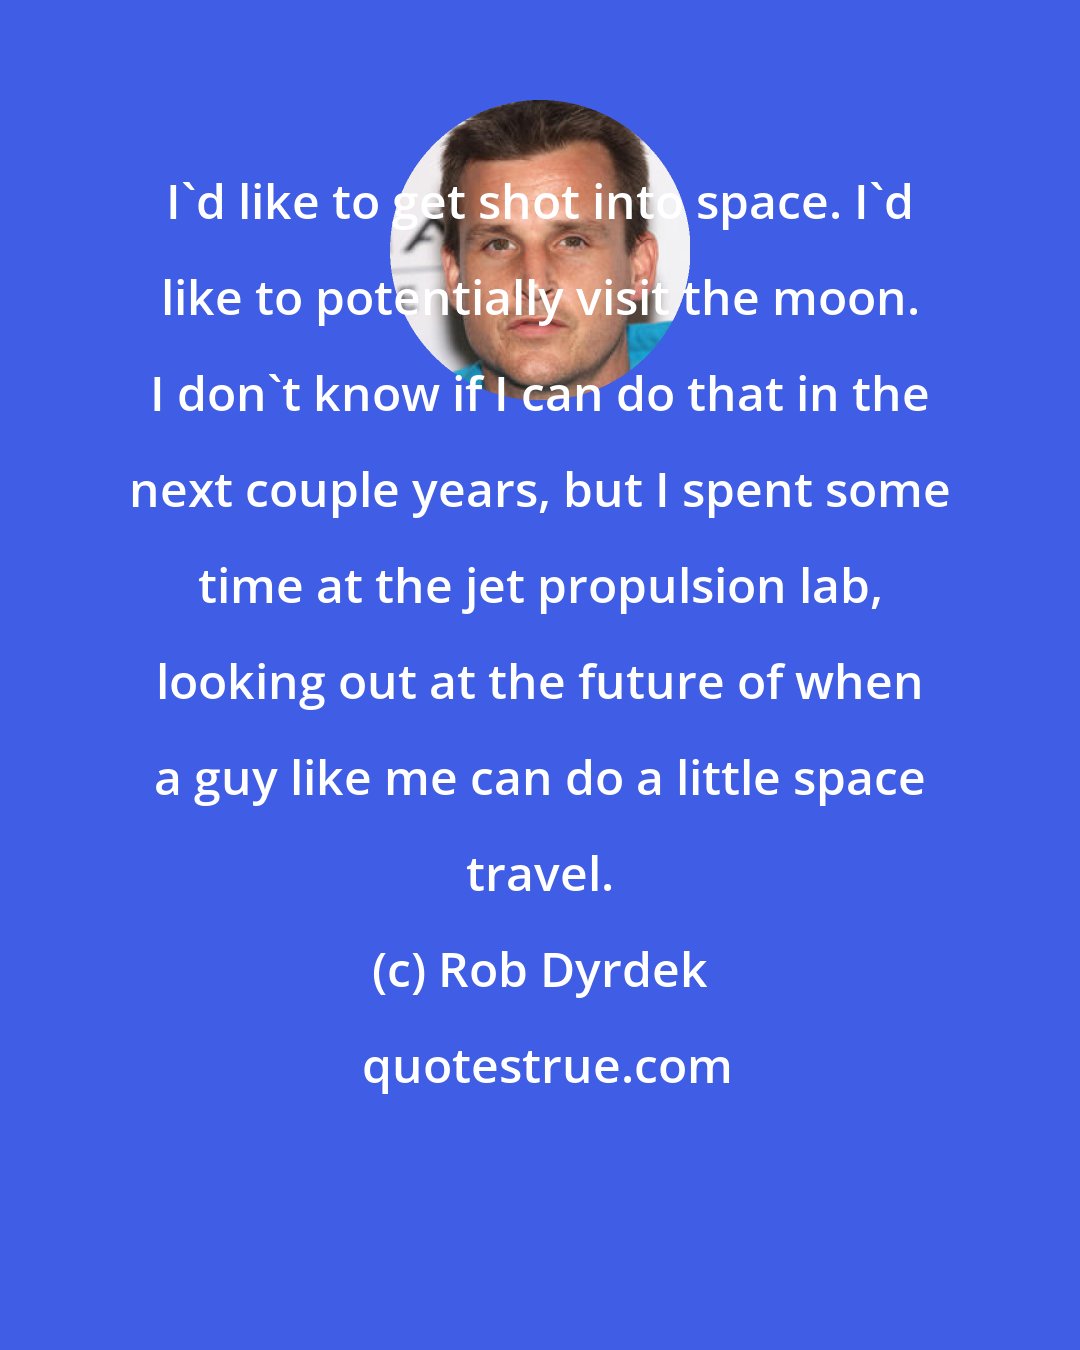 Rob Dyrdek: I'd like to get shot into space. I'd like to potentially visit the moon. I don't know if I can do that in the next couple years, but I spent some time at the jet propulsion lab, looking out at the future of when a guy like me can do a little space travel.